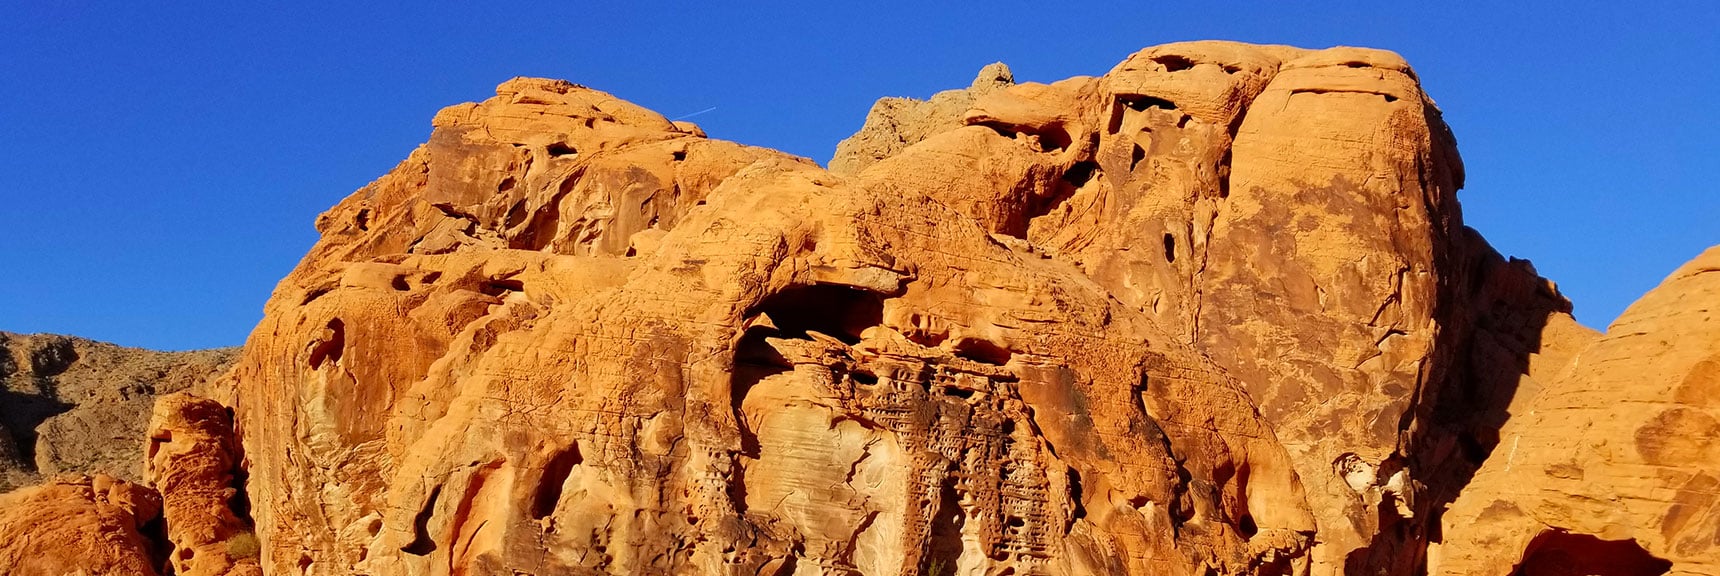 Bizarre Rock Formations in the Upper Pass on Prospect Trail in Valley of Fire State Park, Nevada